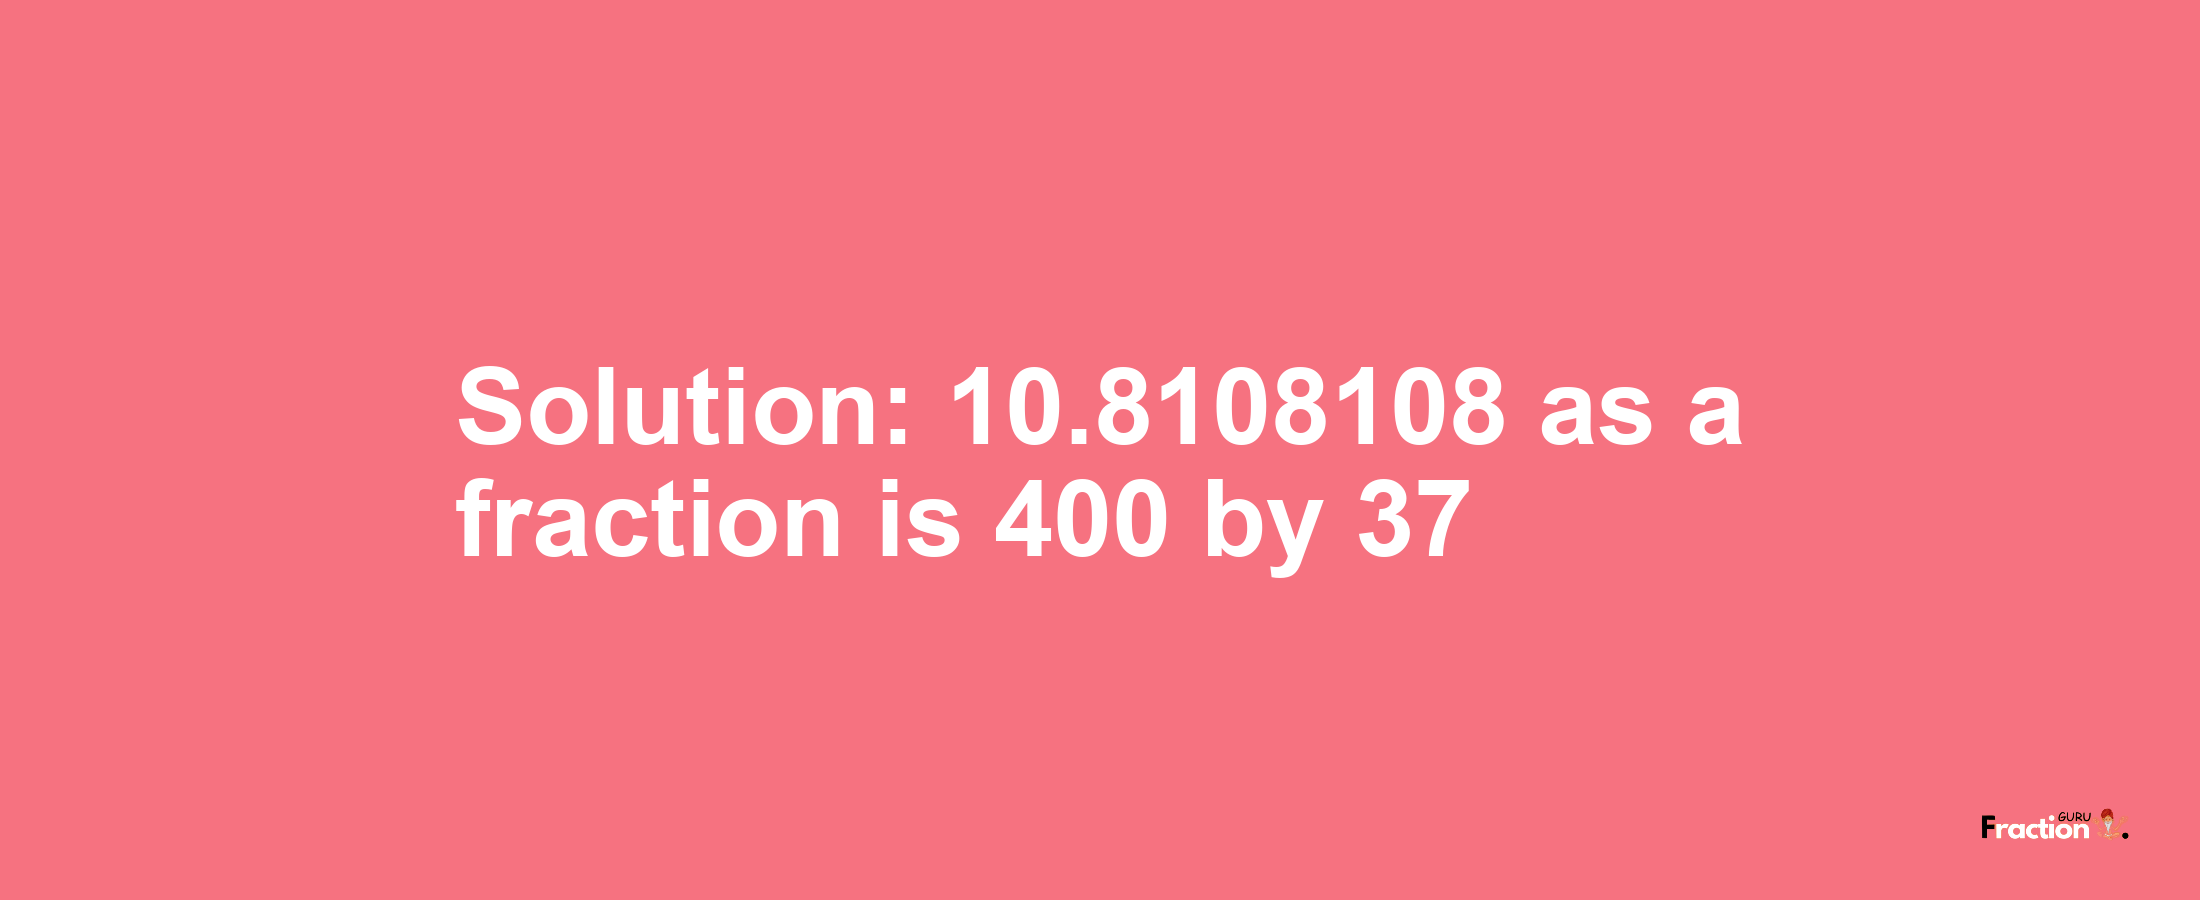 Solution:10.8108108 as a fraction is 400/37